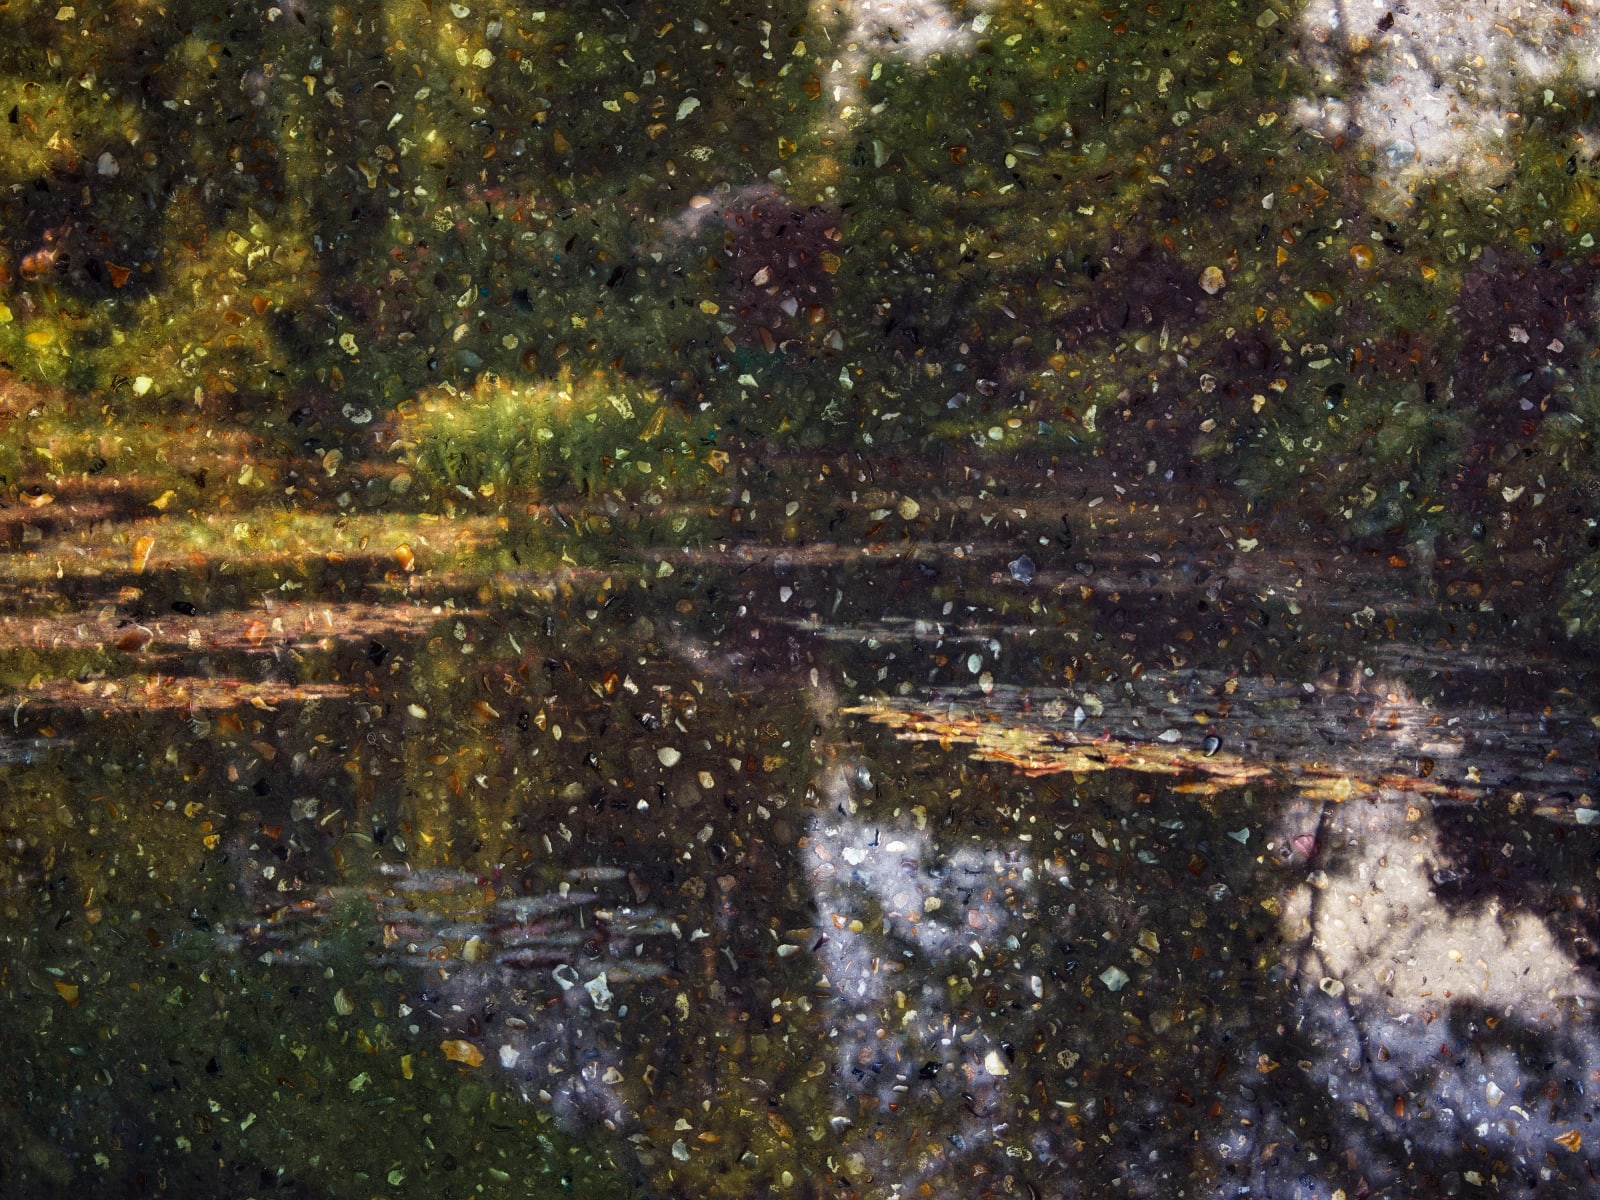 Abelardo Morell, Tent-Camera Image on Ground: View of Monet's Water Garden #1, Giverny, France, 2023